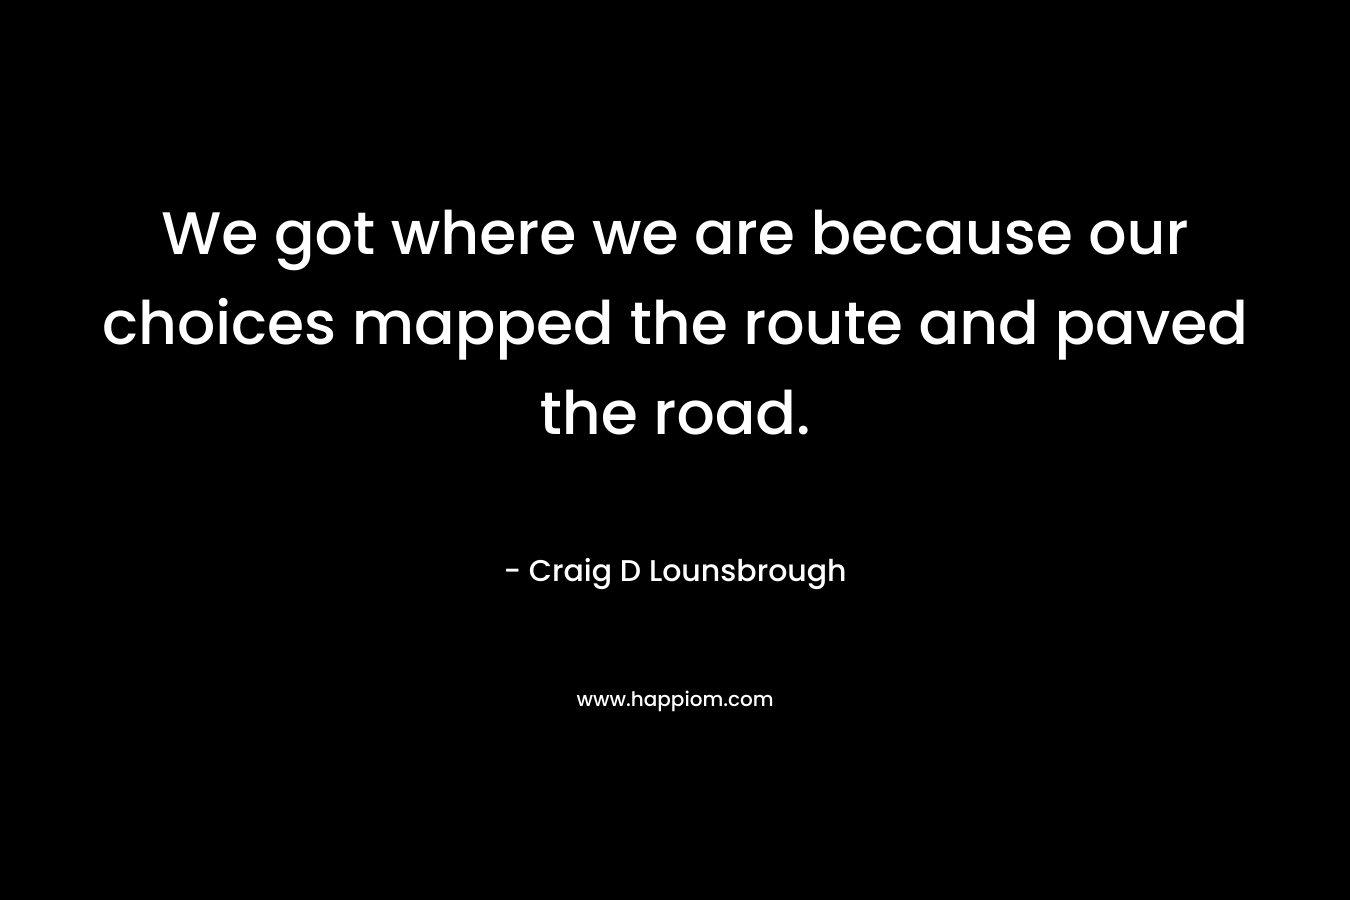 We got where we are because our choices mapped the route and paved the road. – Craig D Lounsbrough